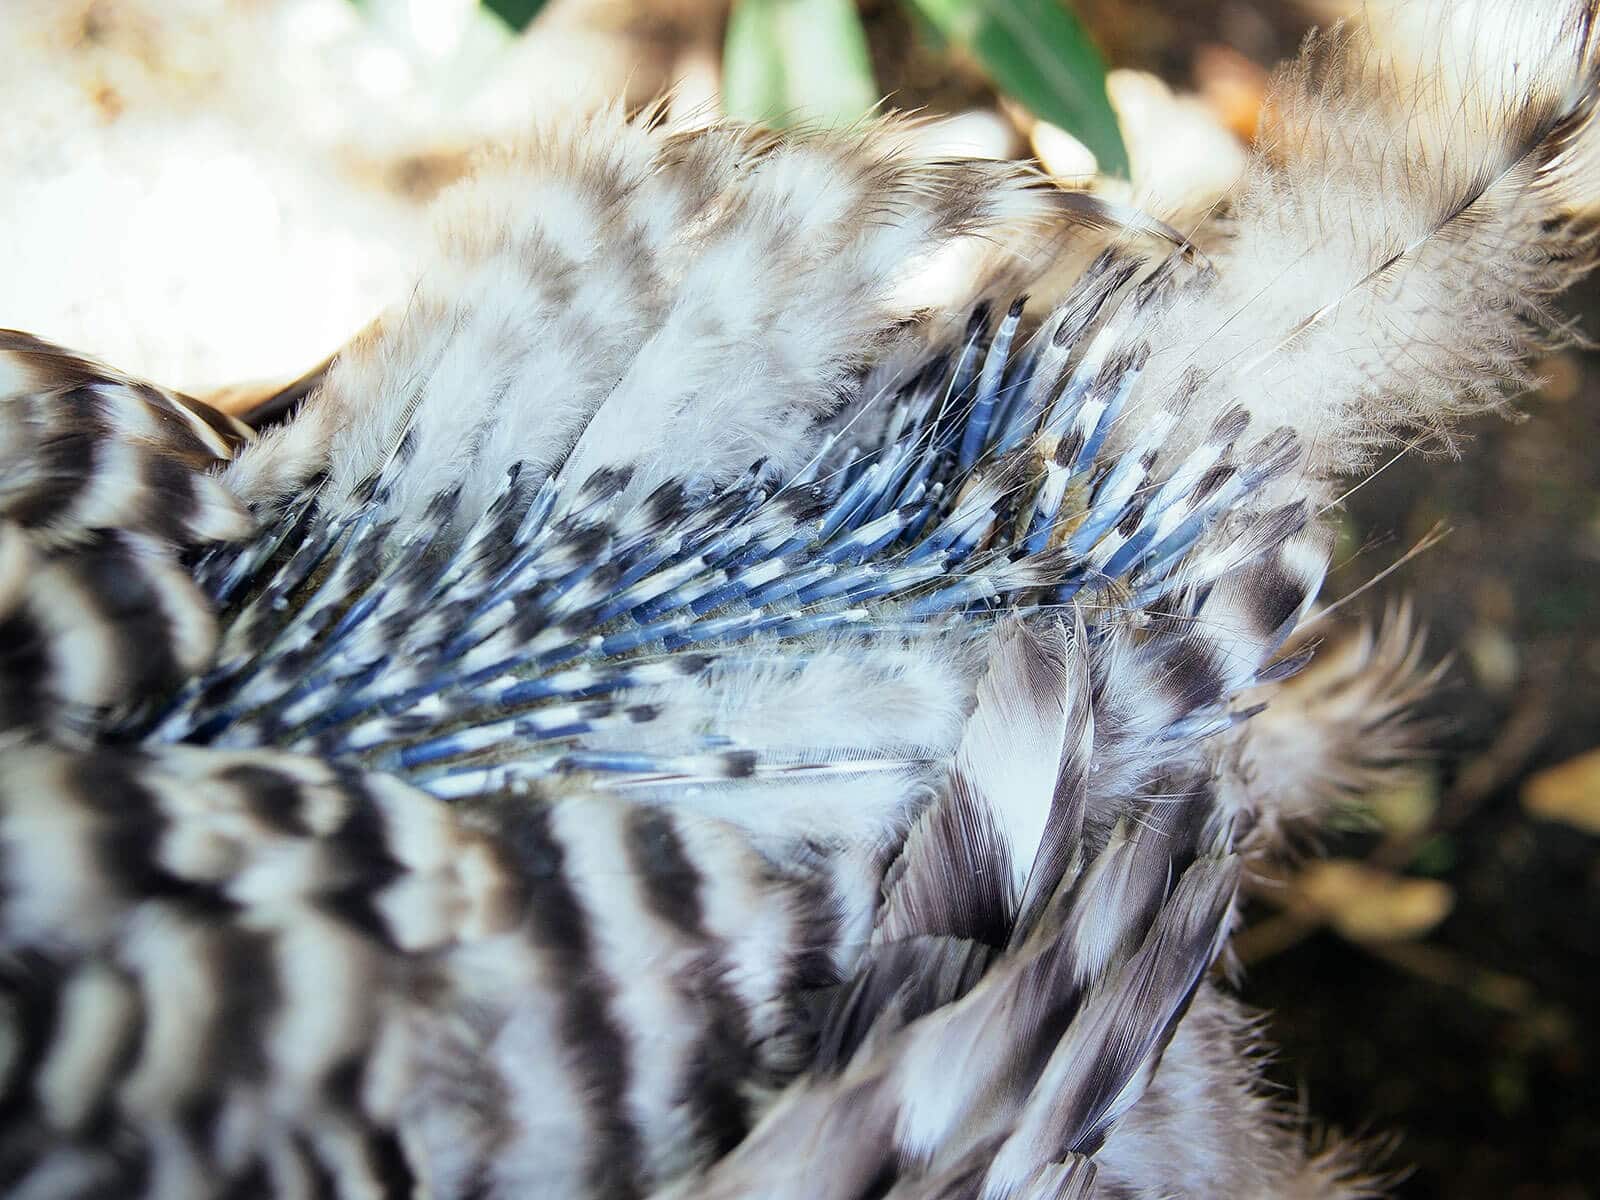 New feathers breaking out of feather shafts on a chicken's tail